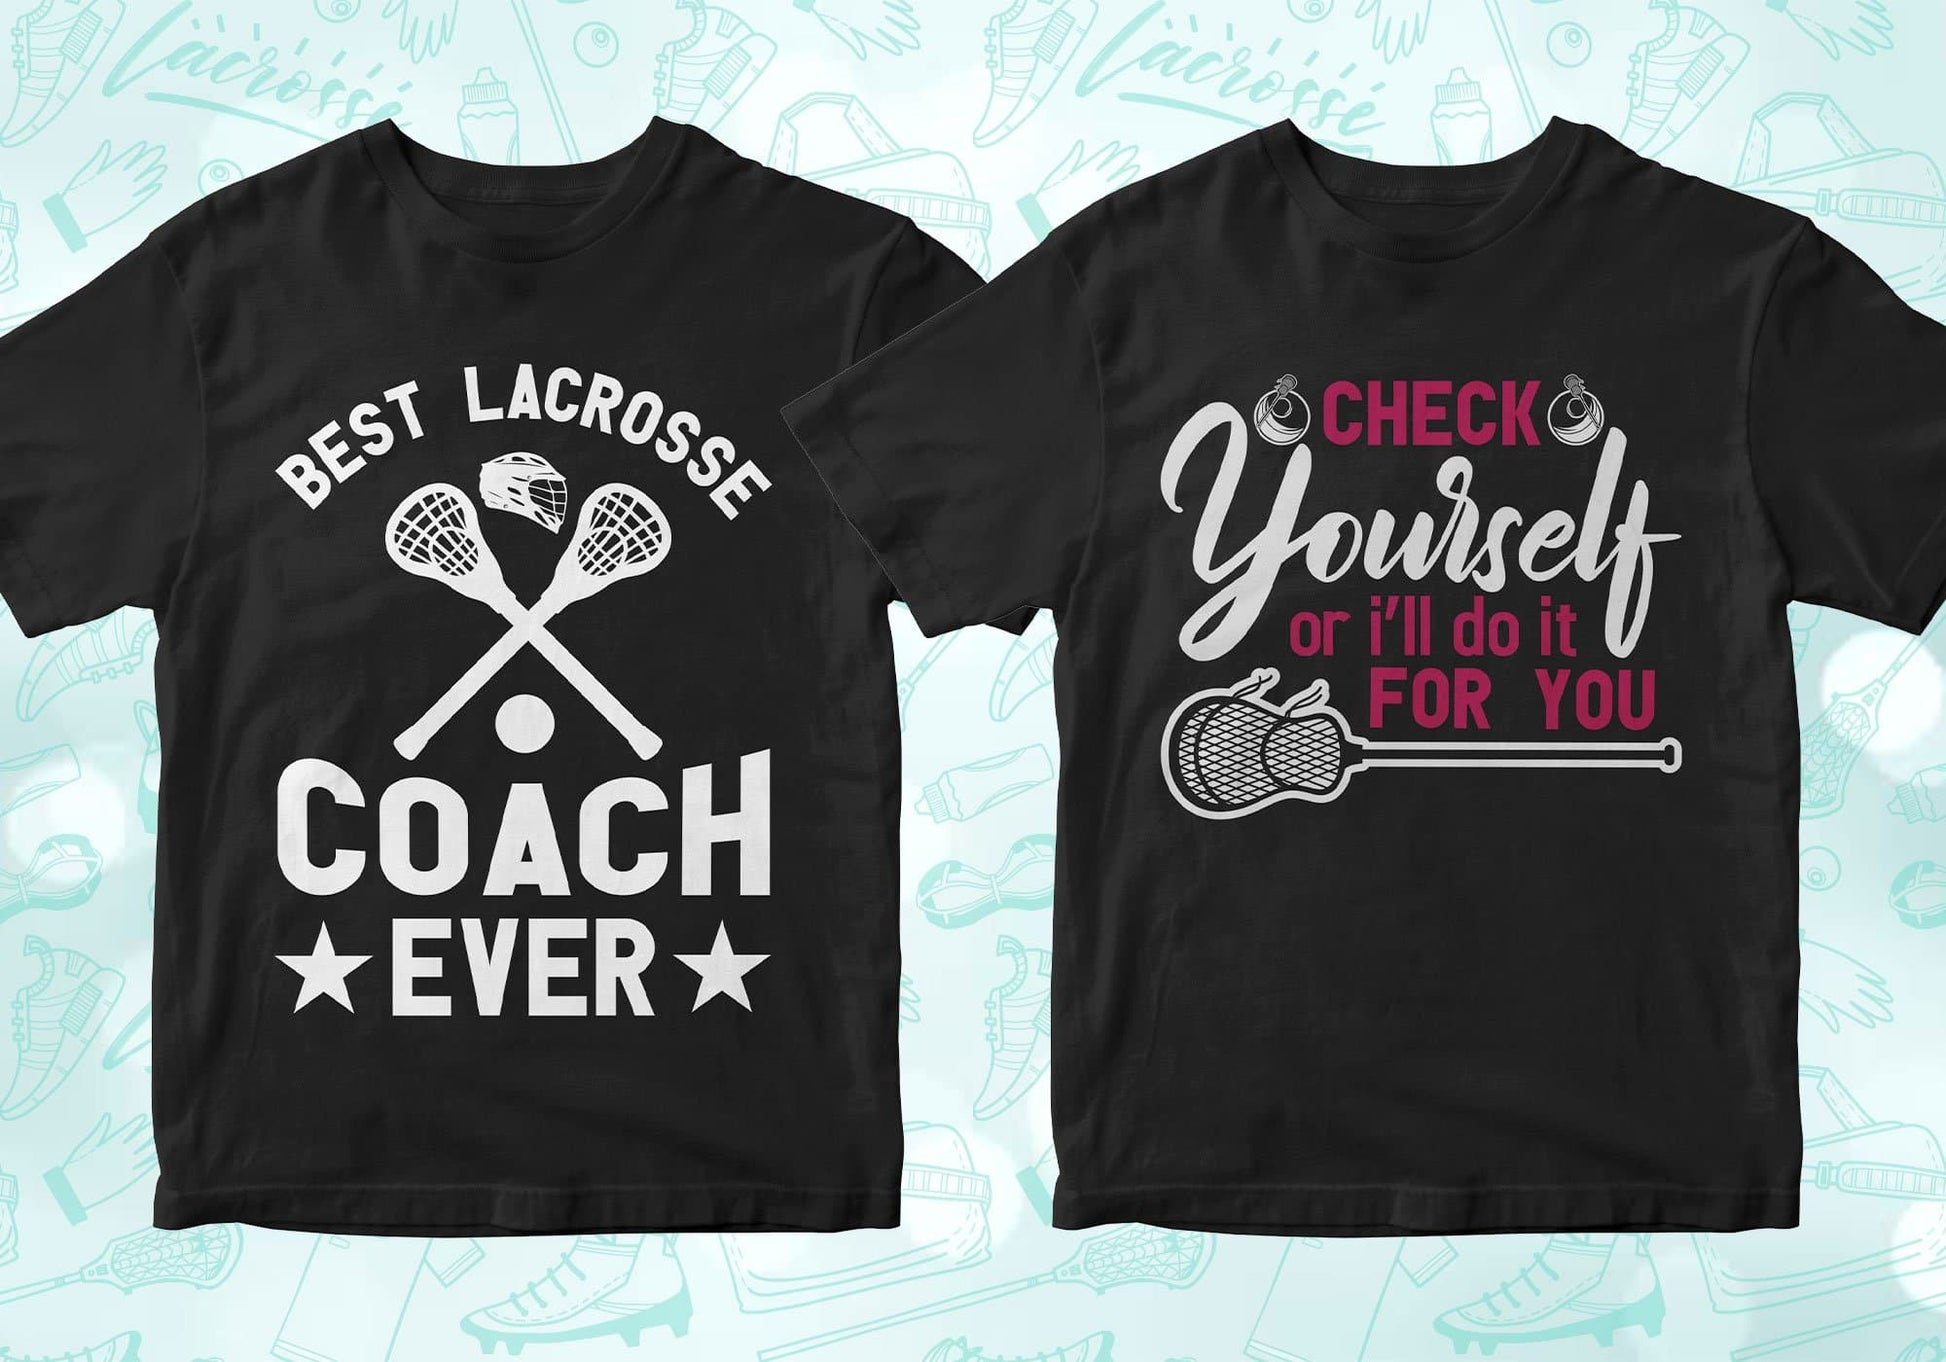 best lacrosse coach ever, check yourself or I'll do it for you, lacrosse shirts lacrosse tshirt lacrosse t shirts lacrosse shirt designs lacrosse graphic